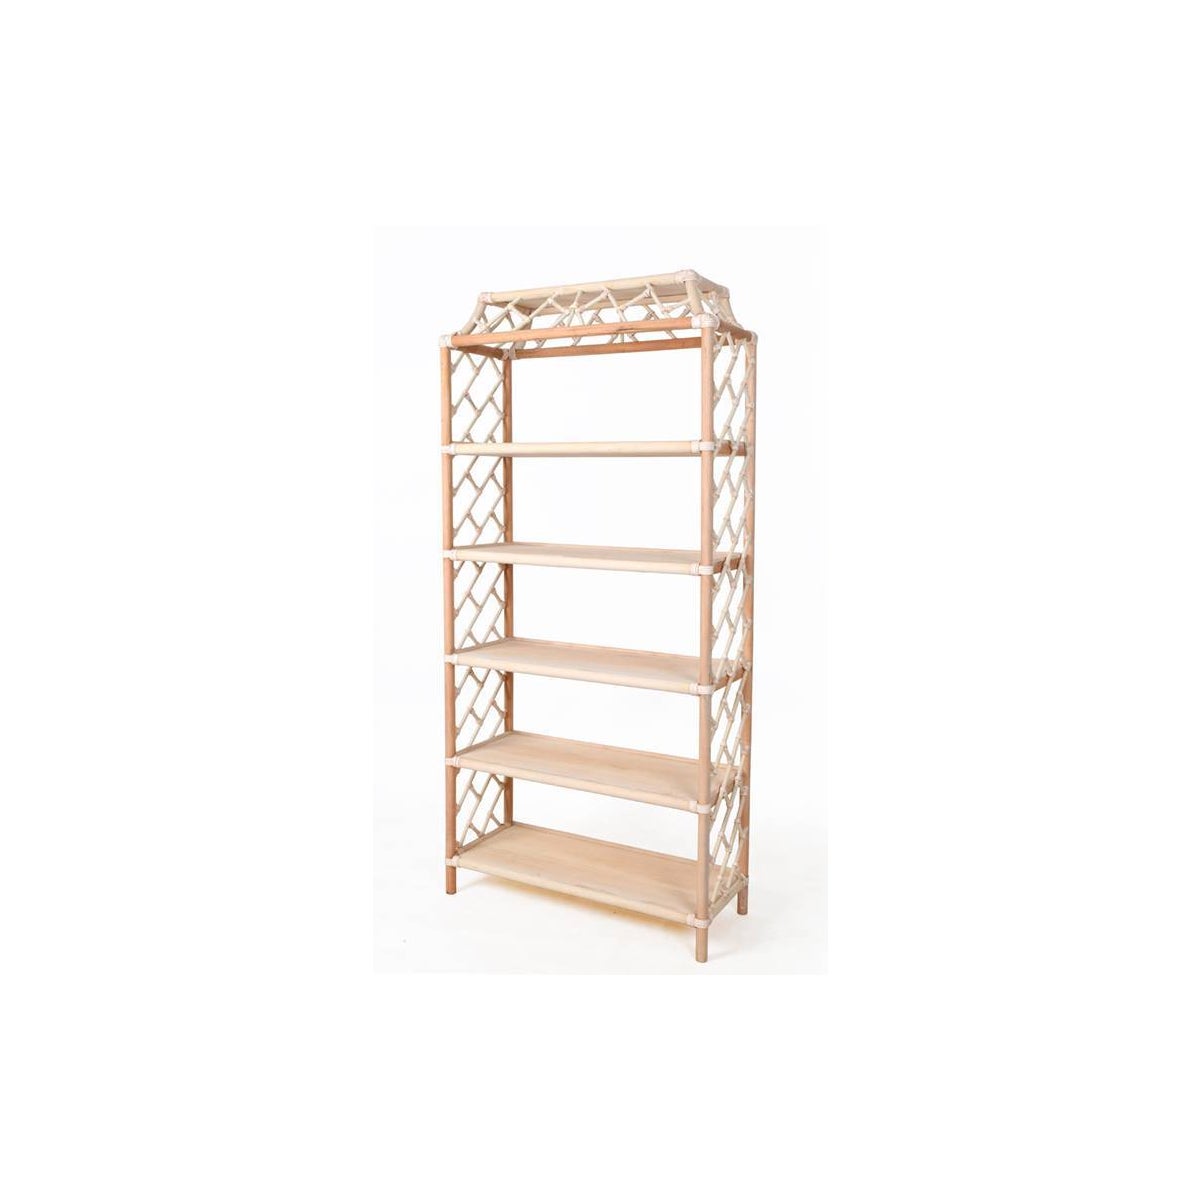 Chippendale Bookcase Unpainted"Select Your Color" Rattan Frame with Leather Wraps